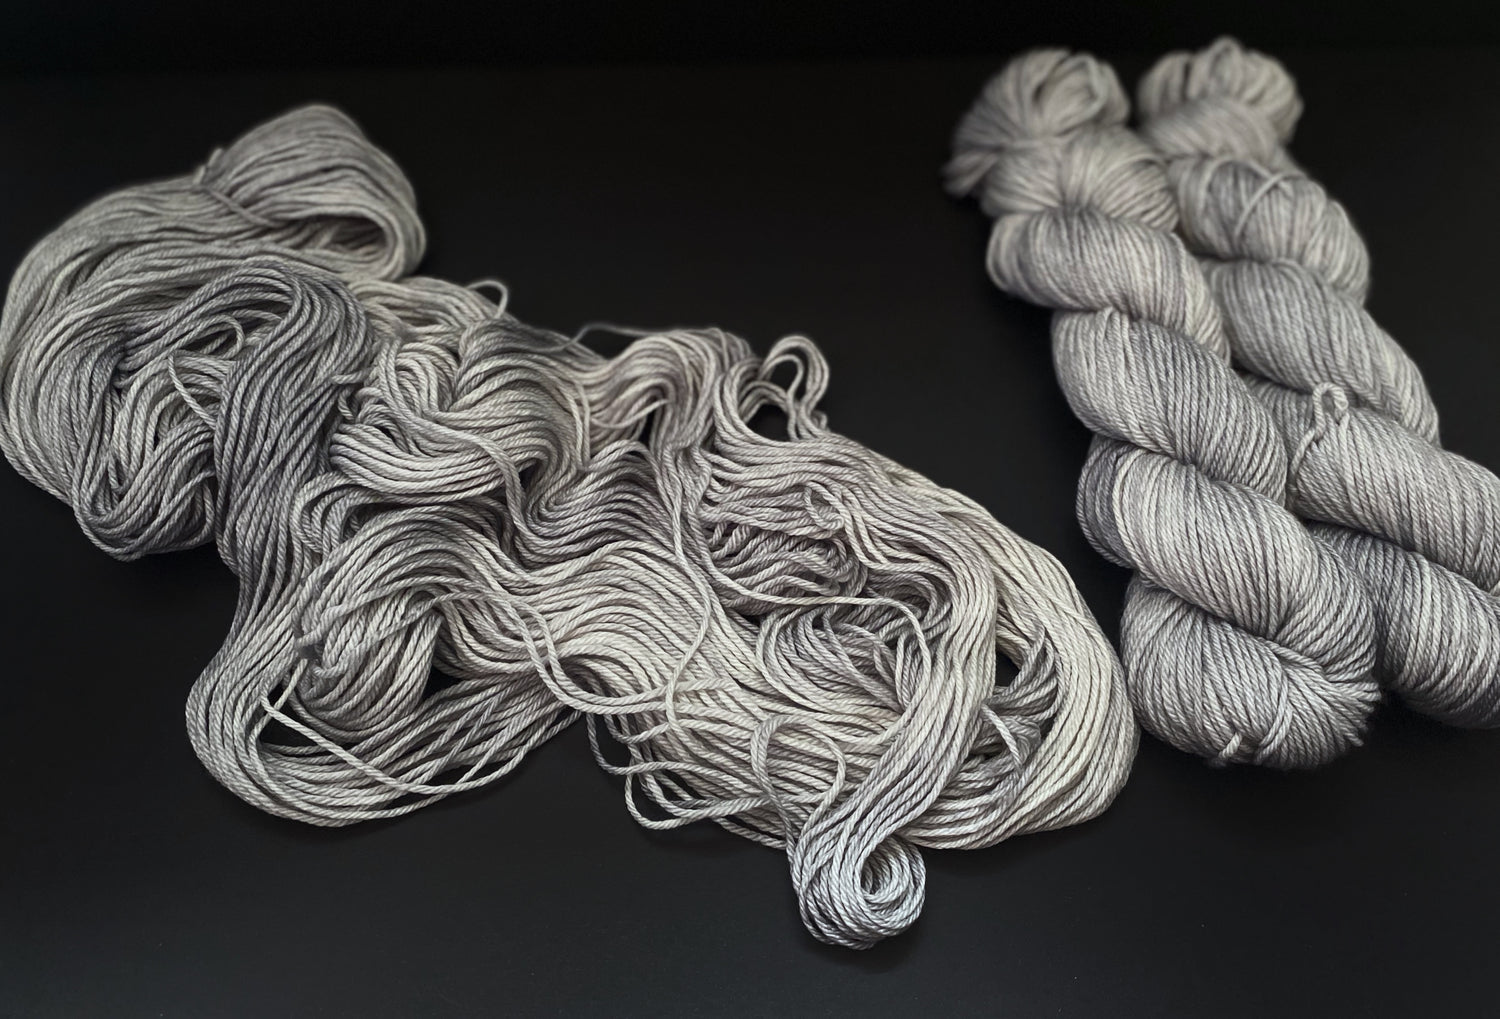 Three skeins of cool silver grey yarn, two on the left wound into hanks, and one draped flowingly on a black background.